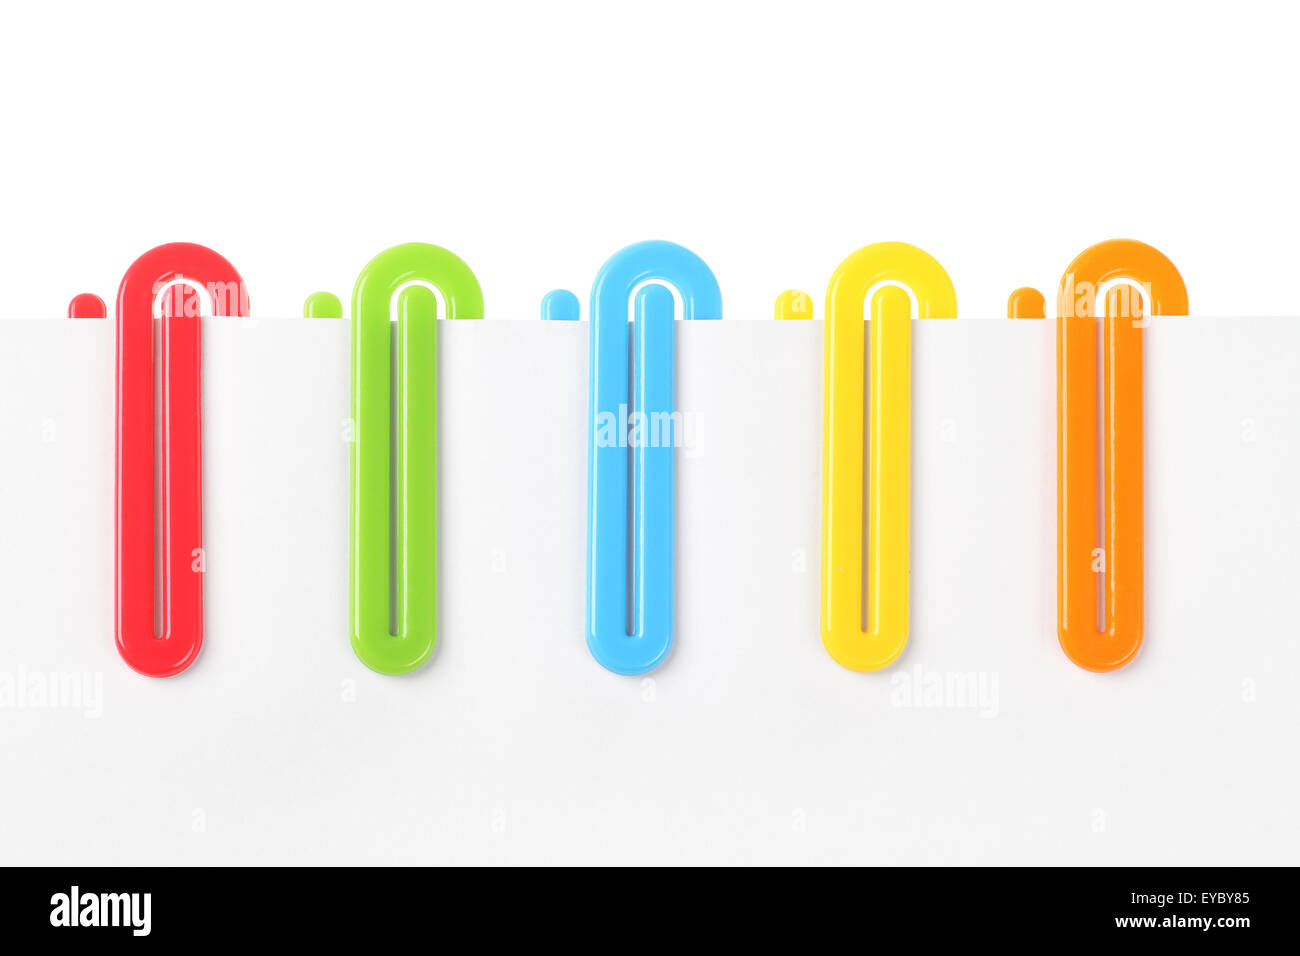 Colourful Plastic Paper Clips Stock Photo by ©design56 92012262